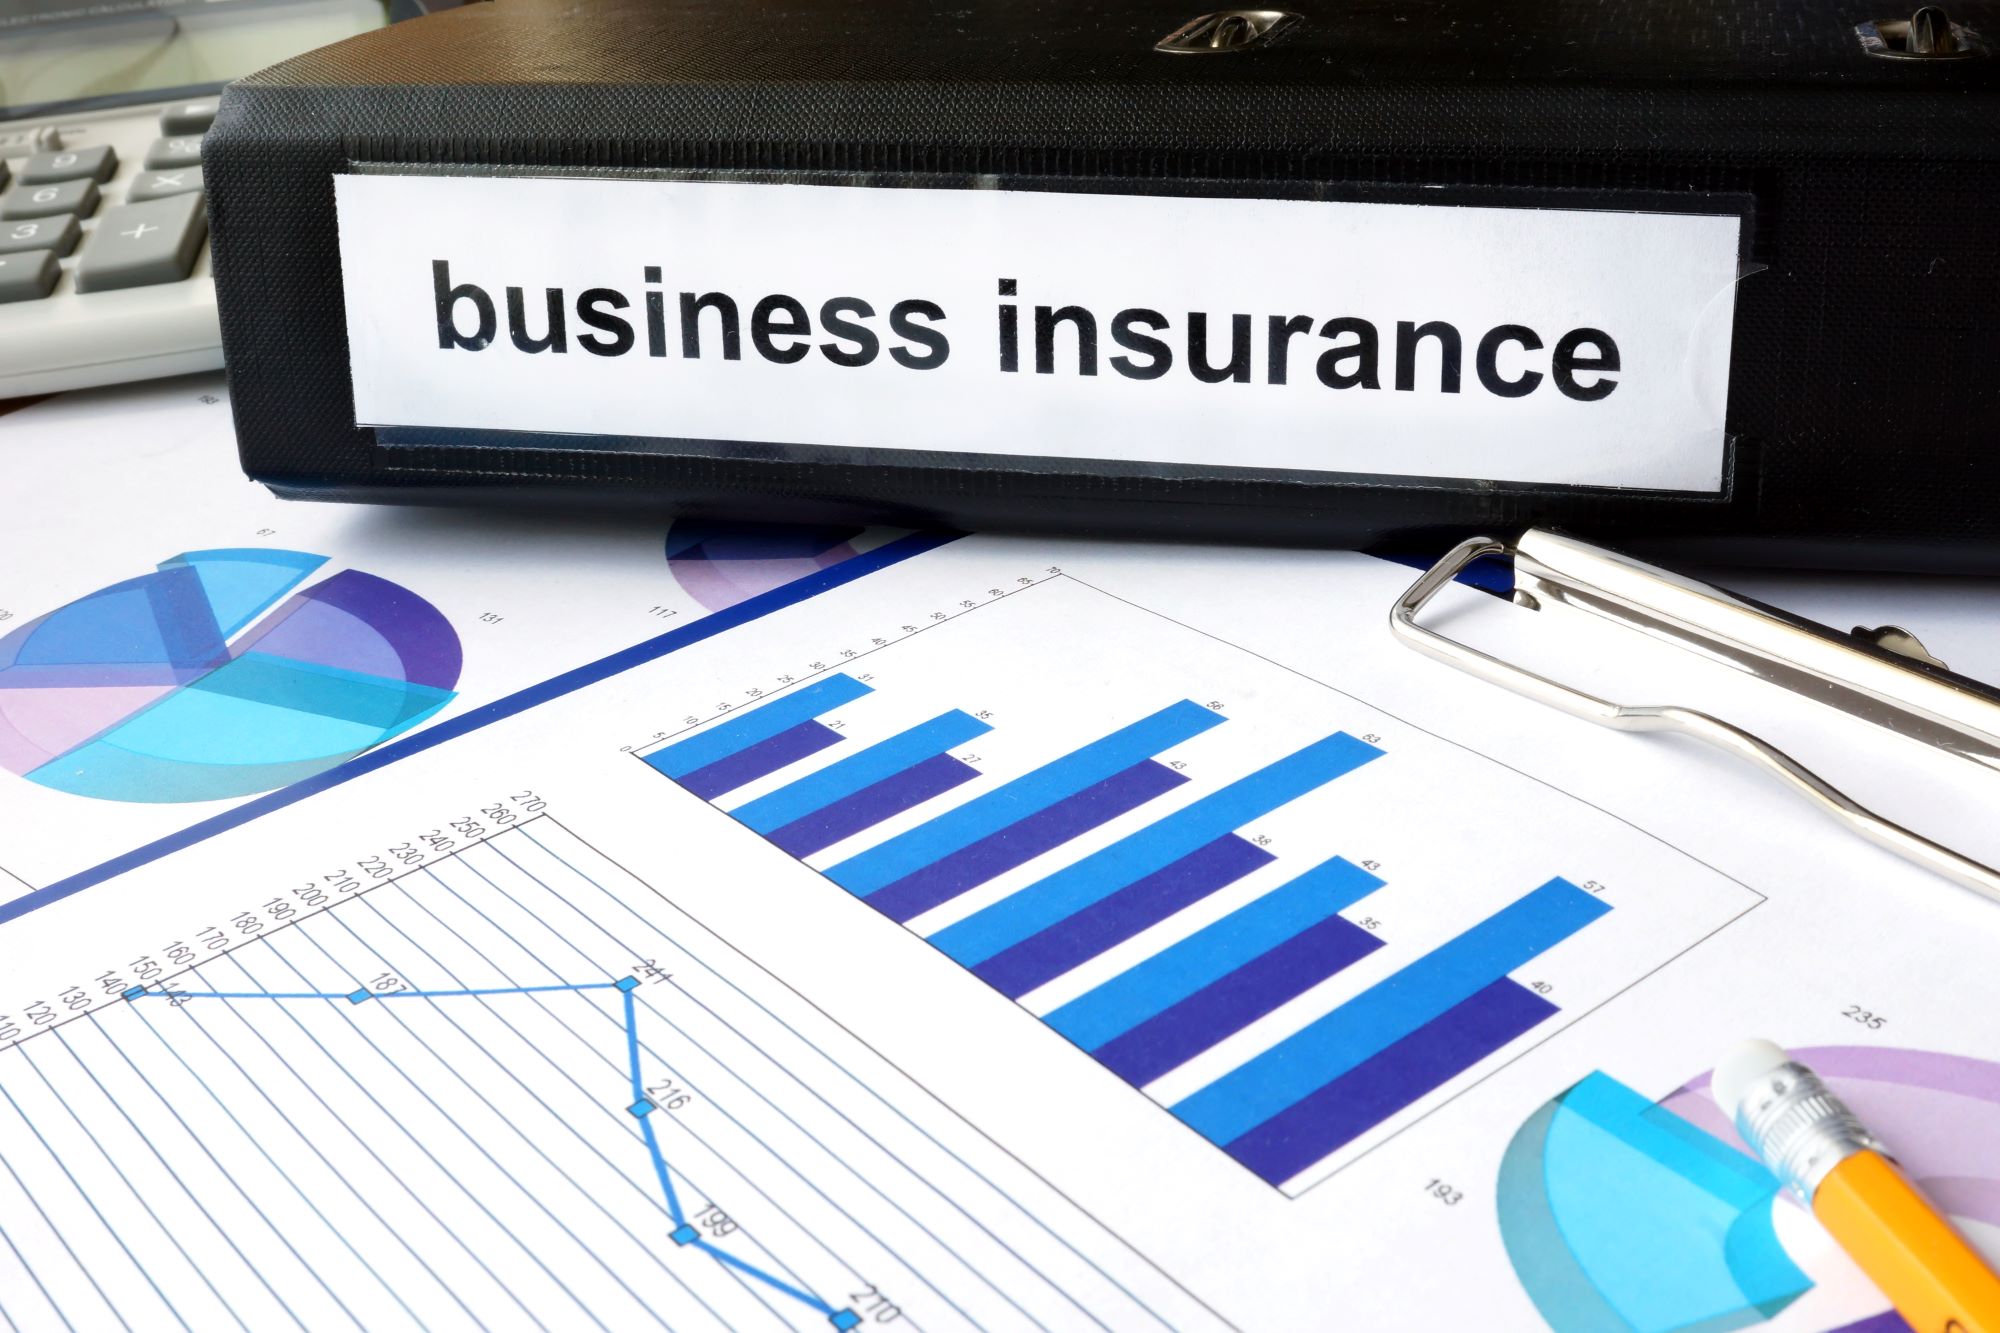 What Ought to Small Companies Search for in Their Basic Legal responsibility Insurance coverage